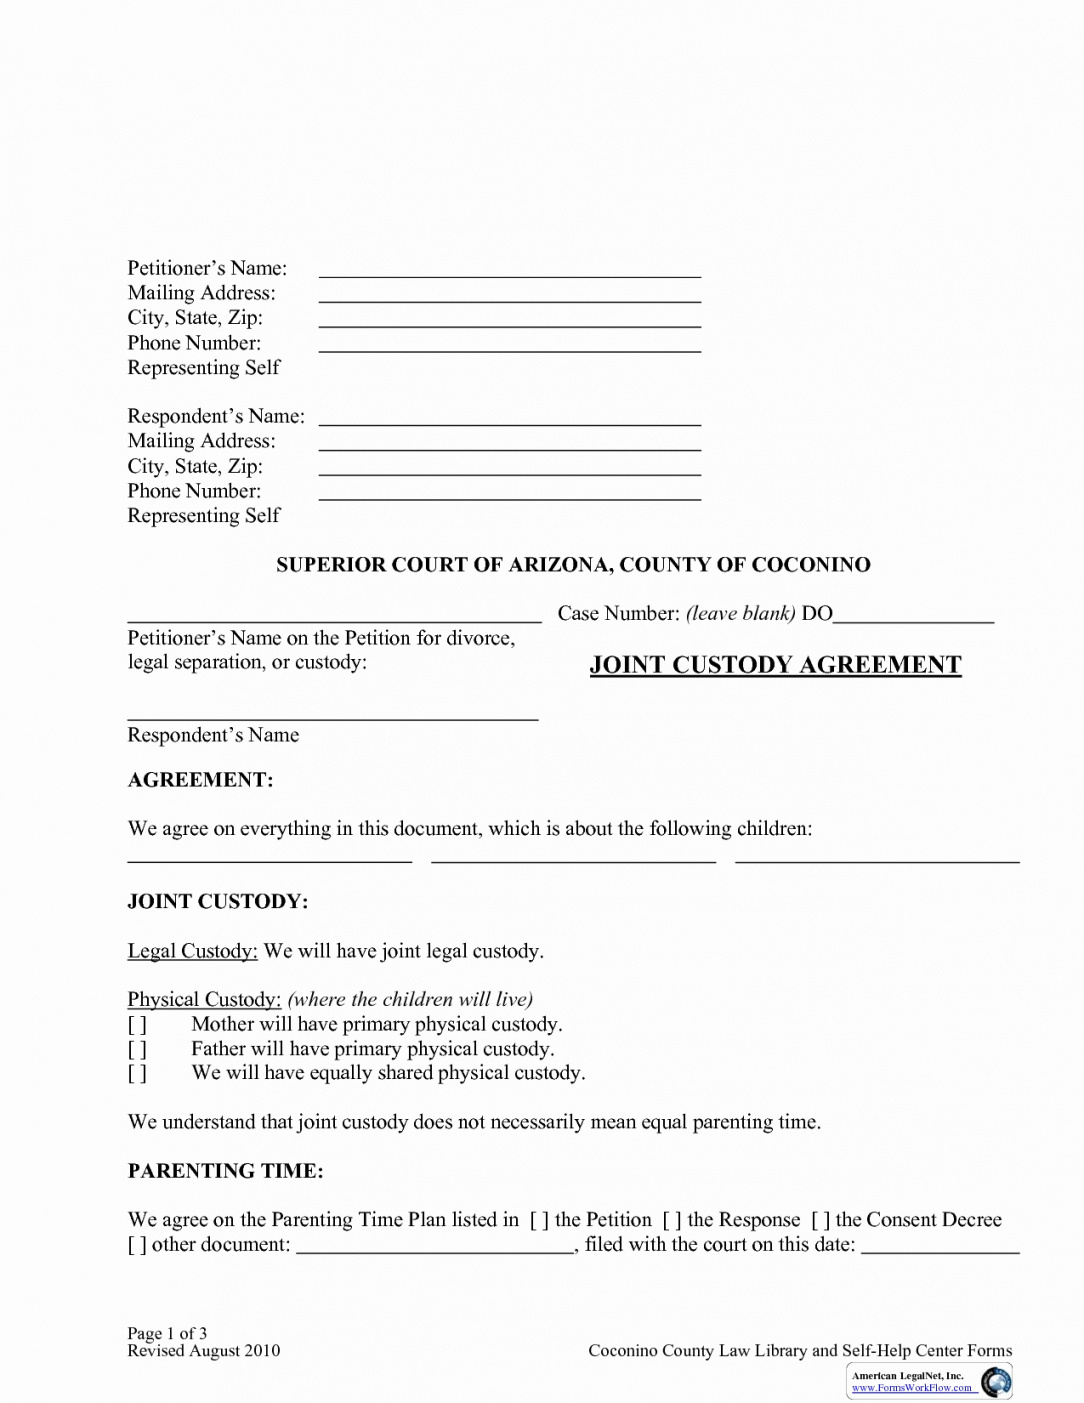 Sample Of Child Custody Agreement 002 Child Custody Agreement Template Ideas Best Picture Of Form